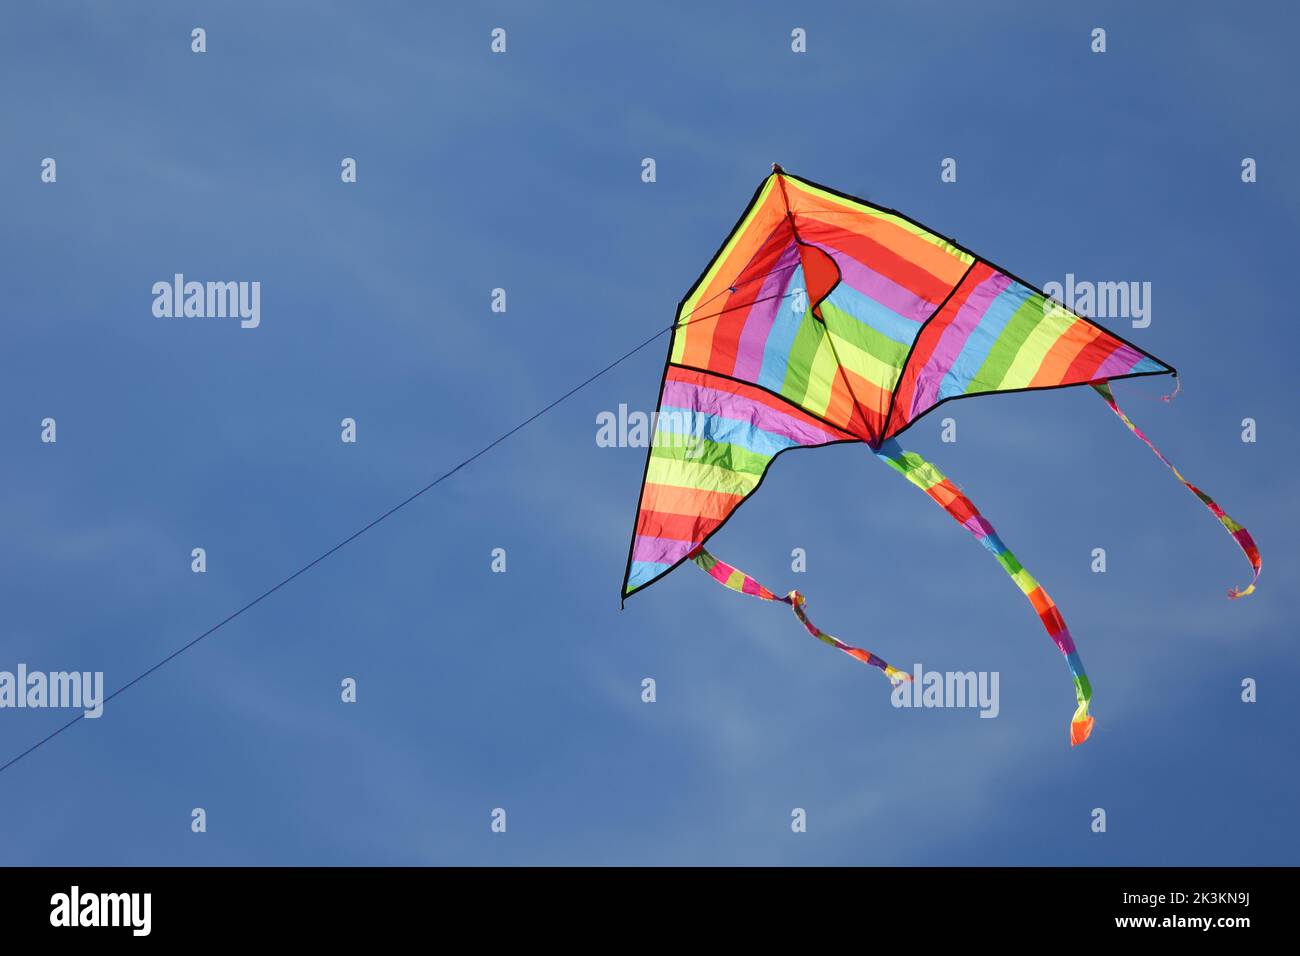 Kite with rainbow colors flying in the blue sky symbol of hope joy brotherhood Stock Photo